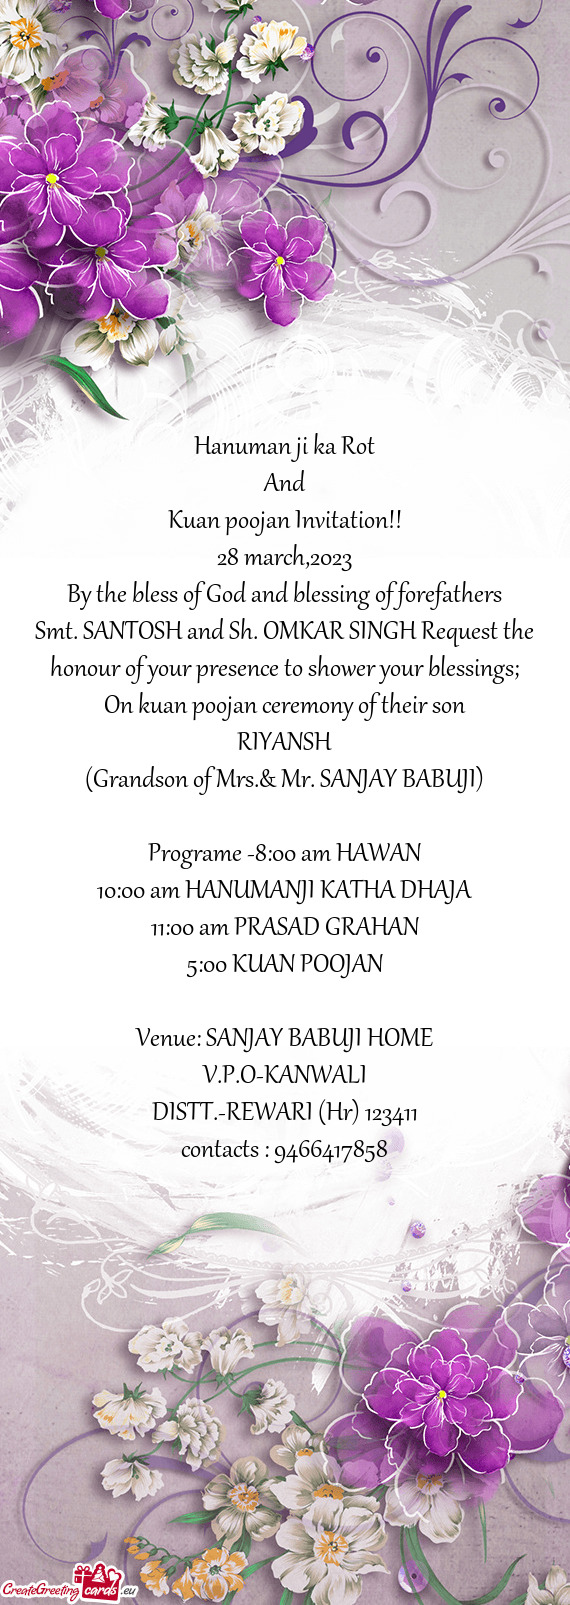 Smt. SANTOSH and Sh. OMKAR SINGH Request the honour of your presence to shower your blessings;